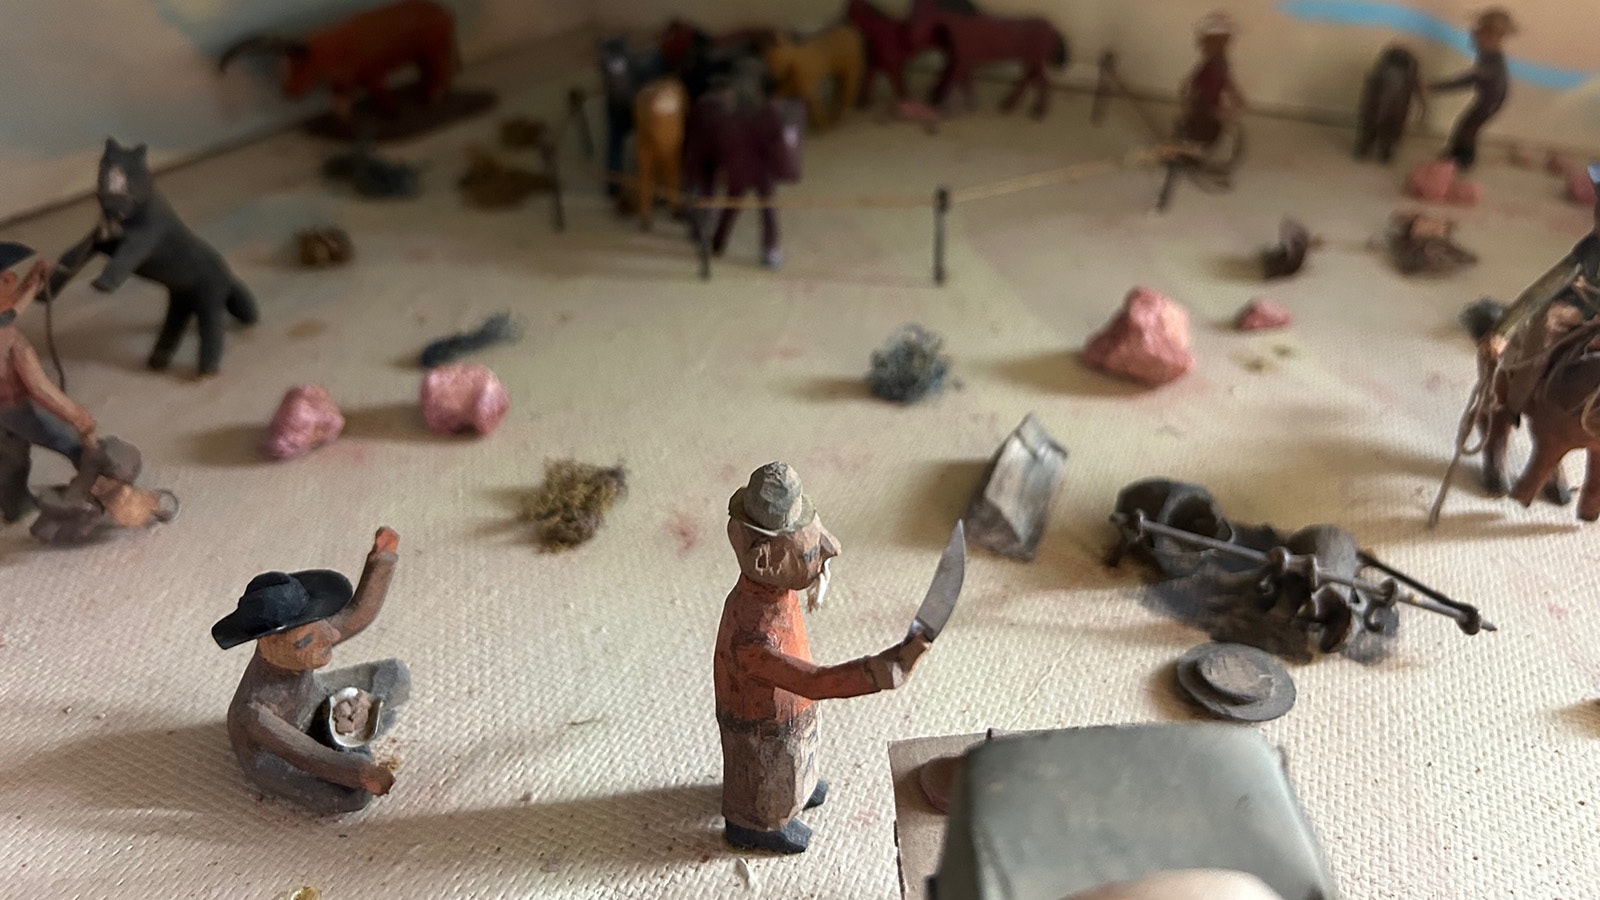 A diorama shows life around the chuck wagon with figurines carved by Bill Evans.